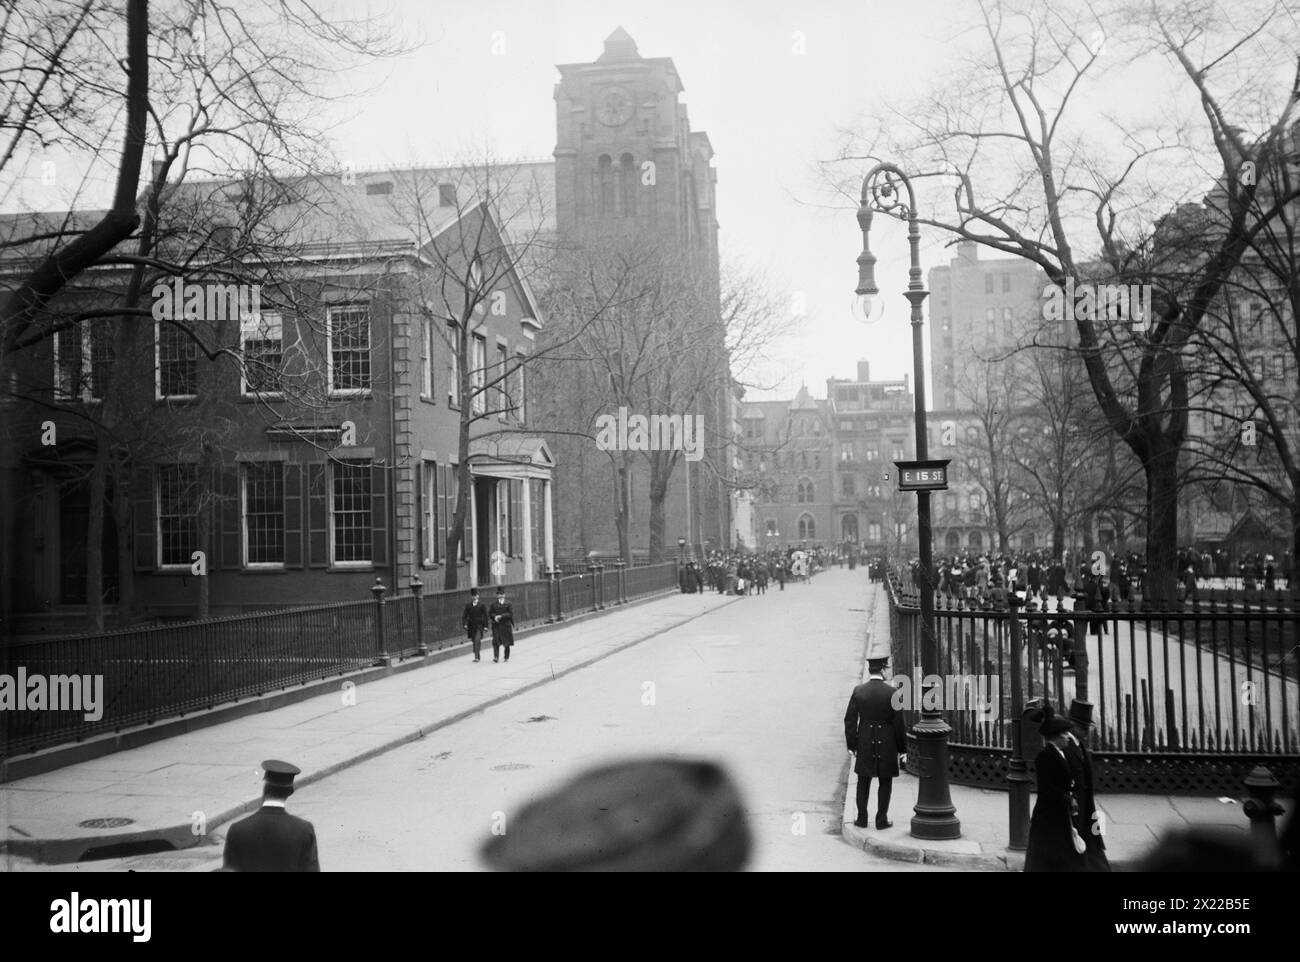 Stuyvesant Sq. - St. George's at time of Morgan funeral, 1913. Shows funeral of financier John Pierpont Morgan (1837-1913) which took place on April 14, 1913 in New York City. Stock Photo